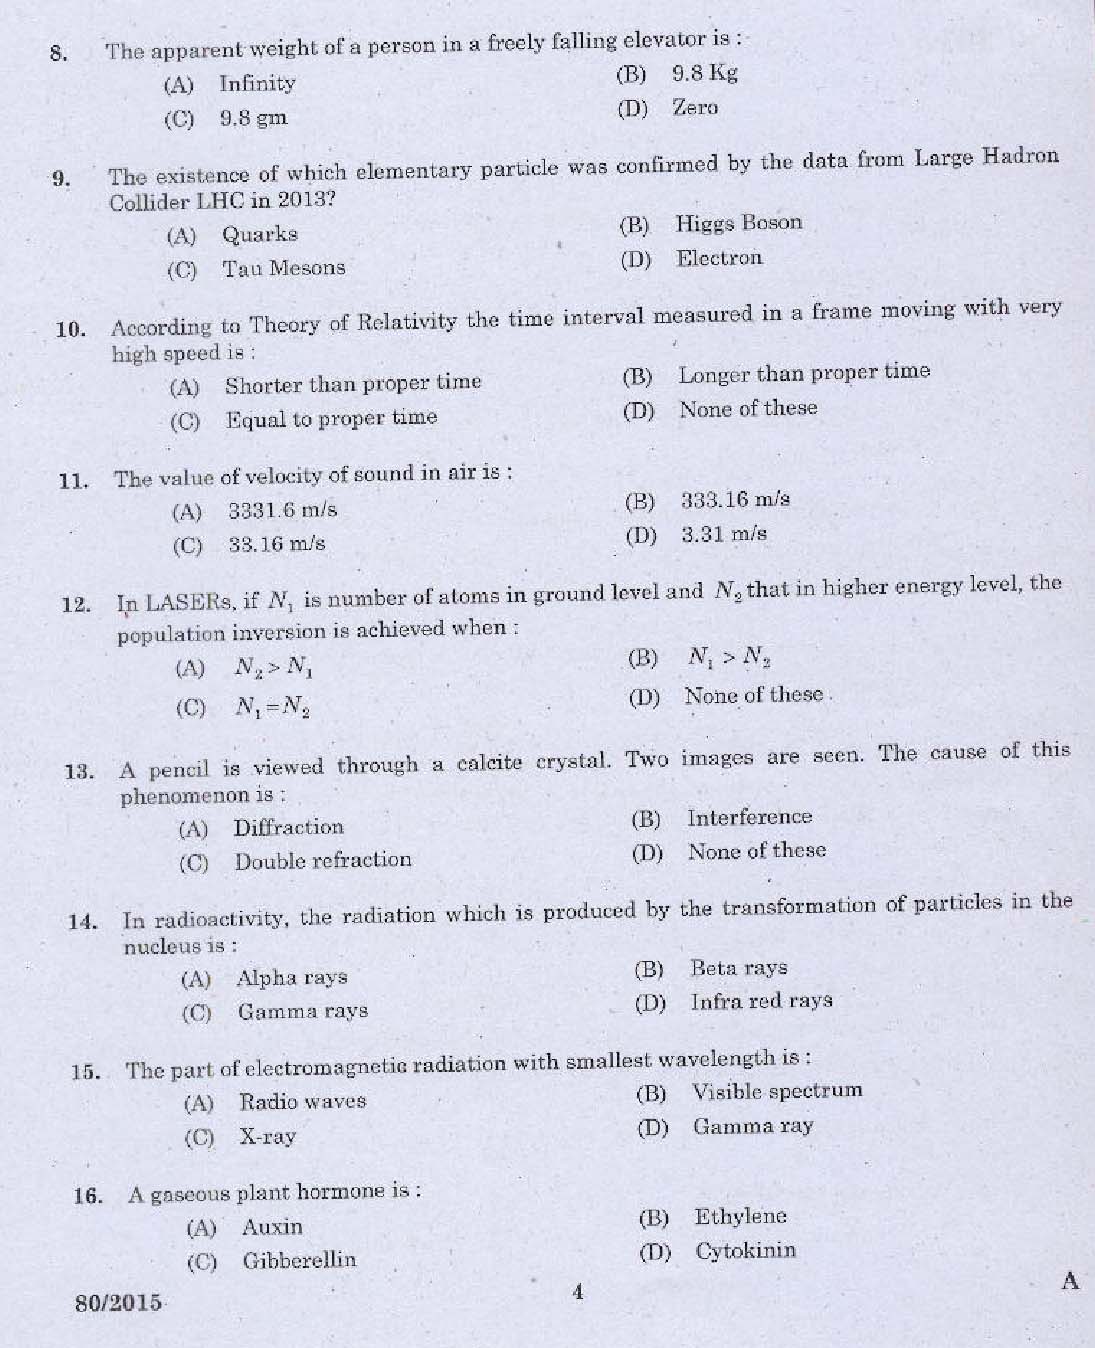 Kerala PSC Station Officer Exam Question Code 802015 2